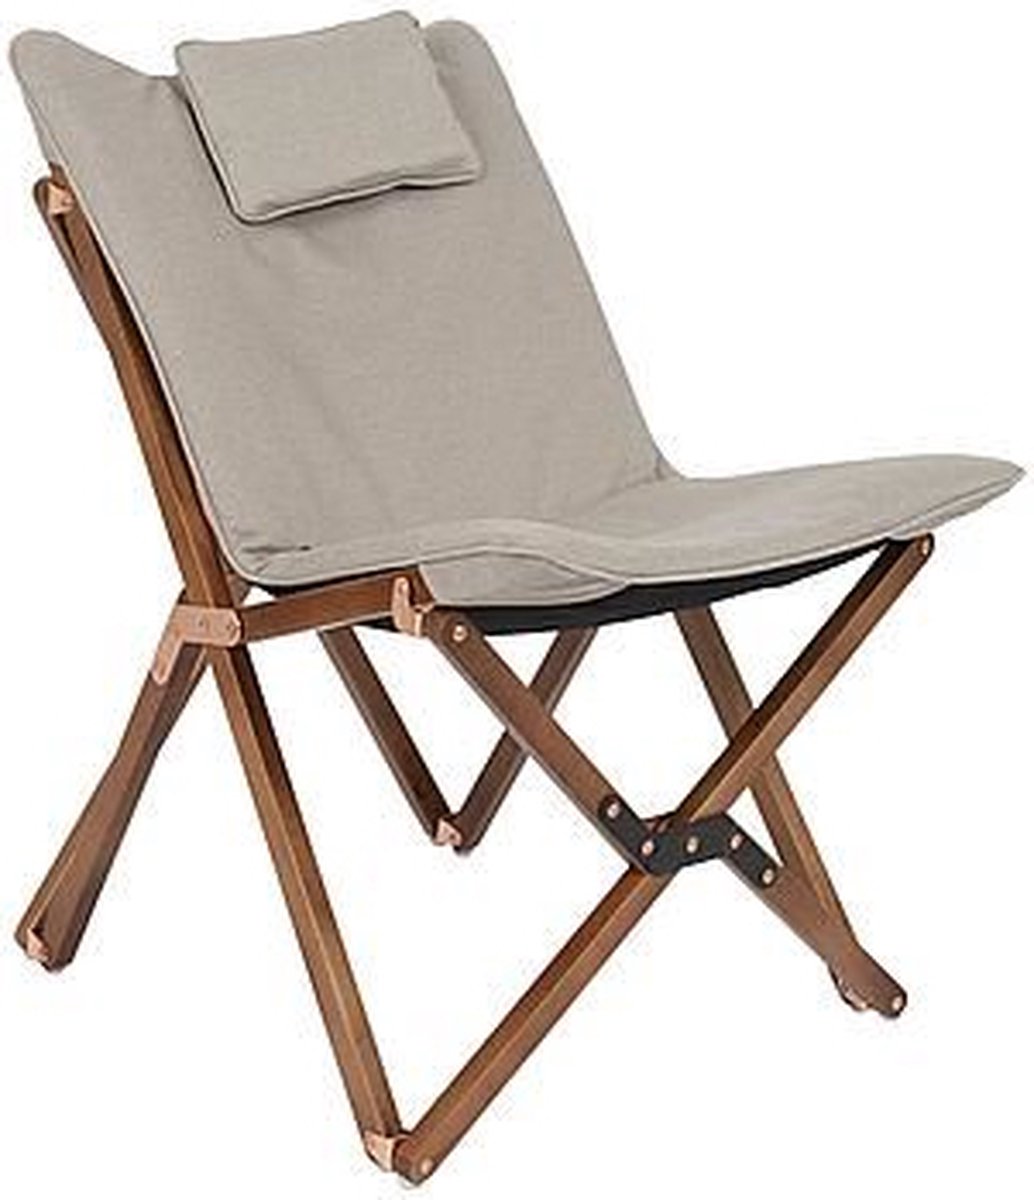 Bo-Camp Urban Outdoor collection - Relaxstoel - Bloomsbury - S - Oxford polyester - Beige